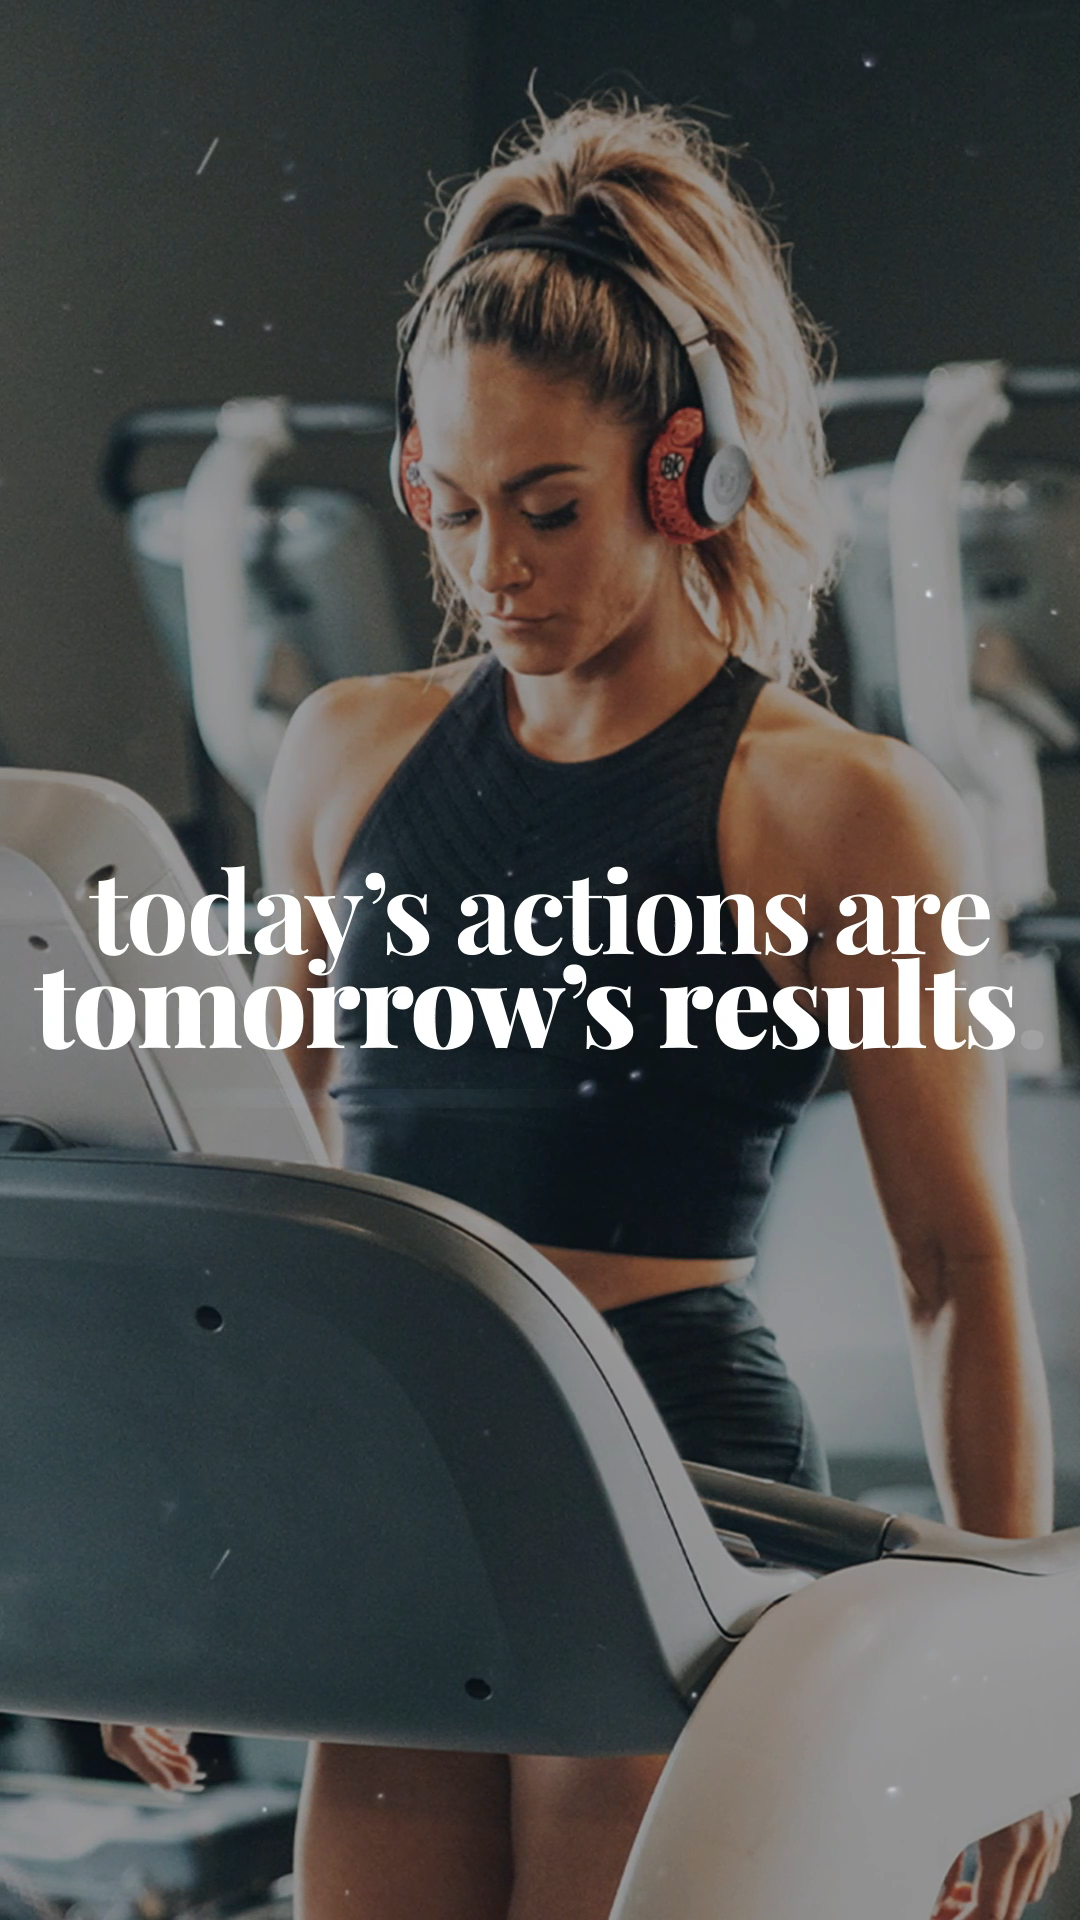 19 fitness Quotes background ideas